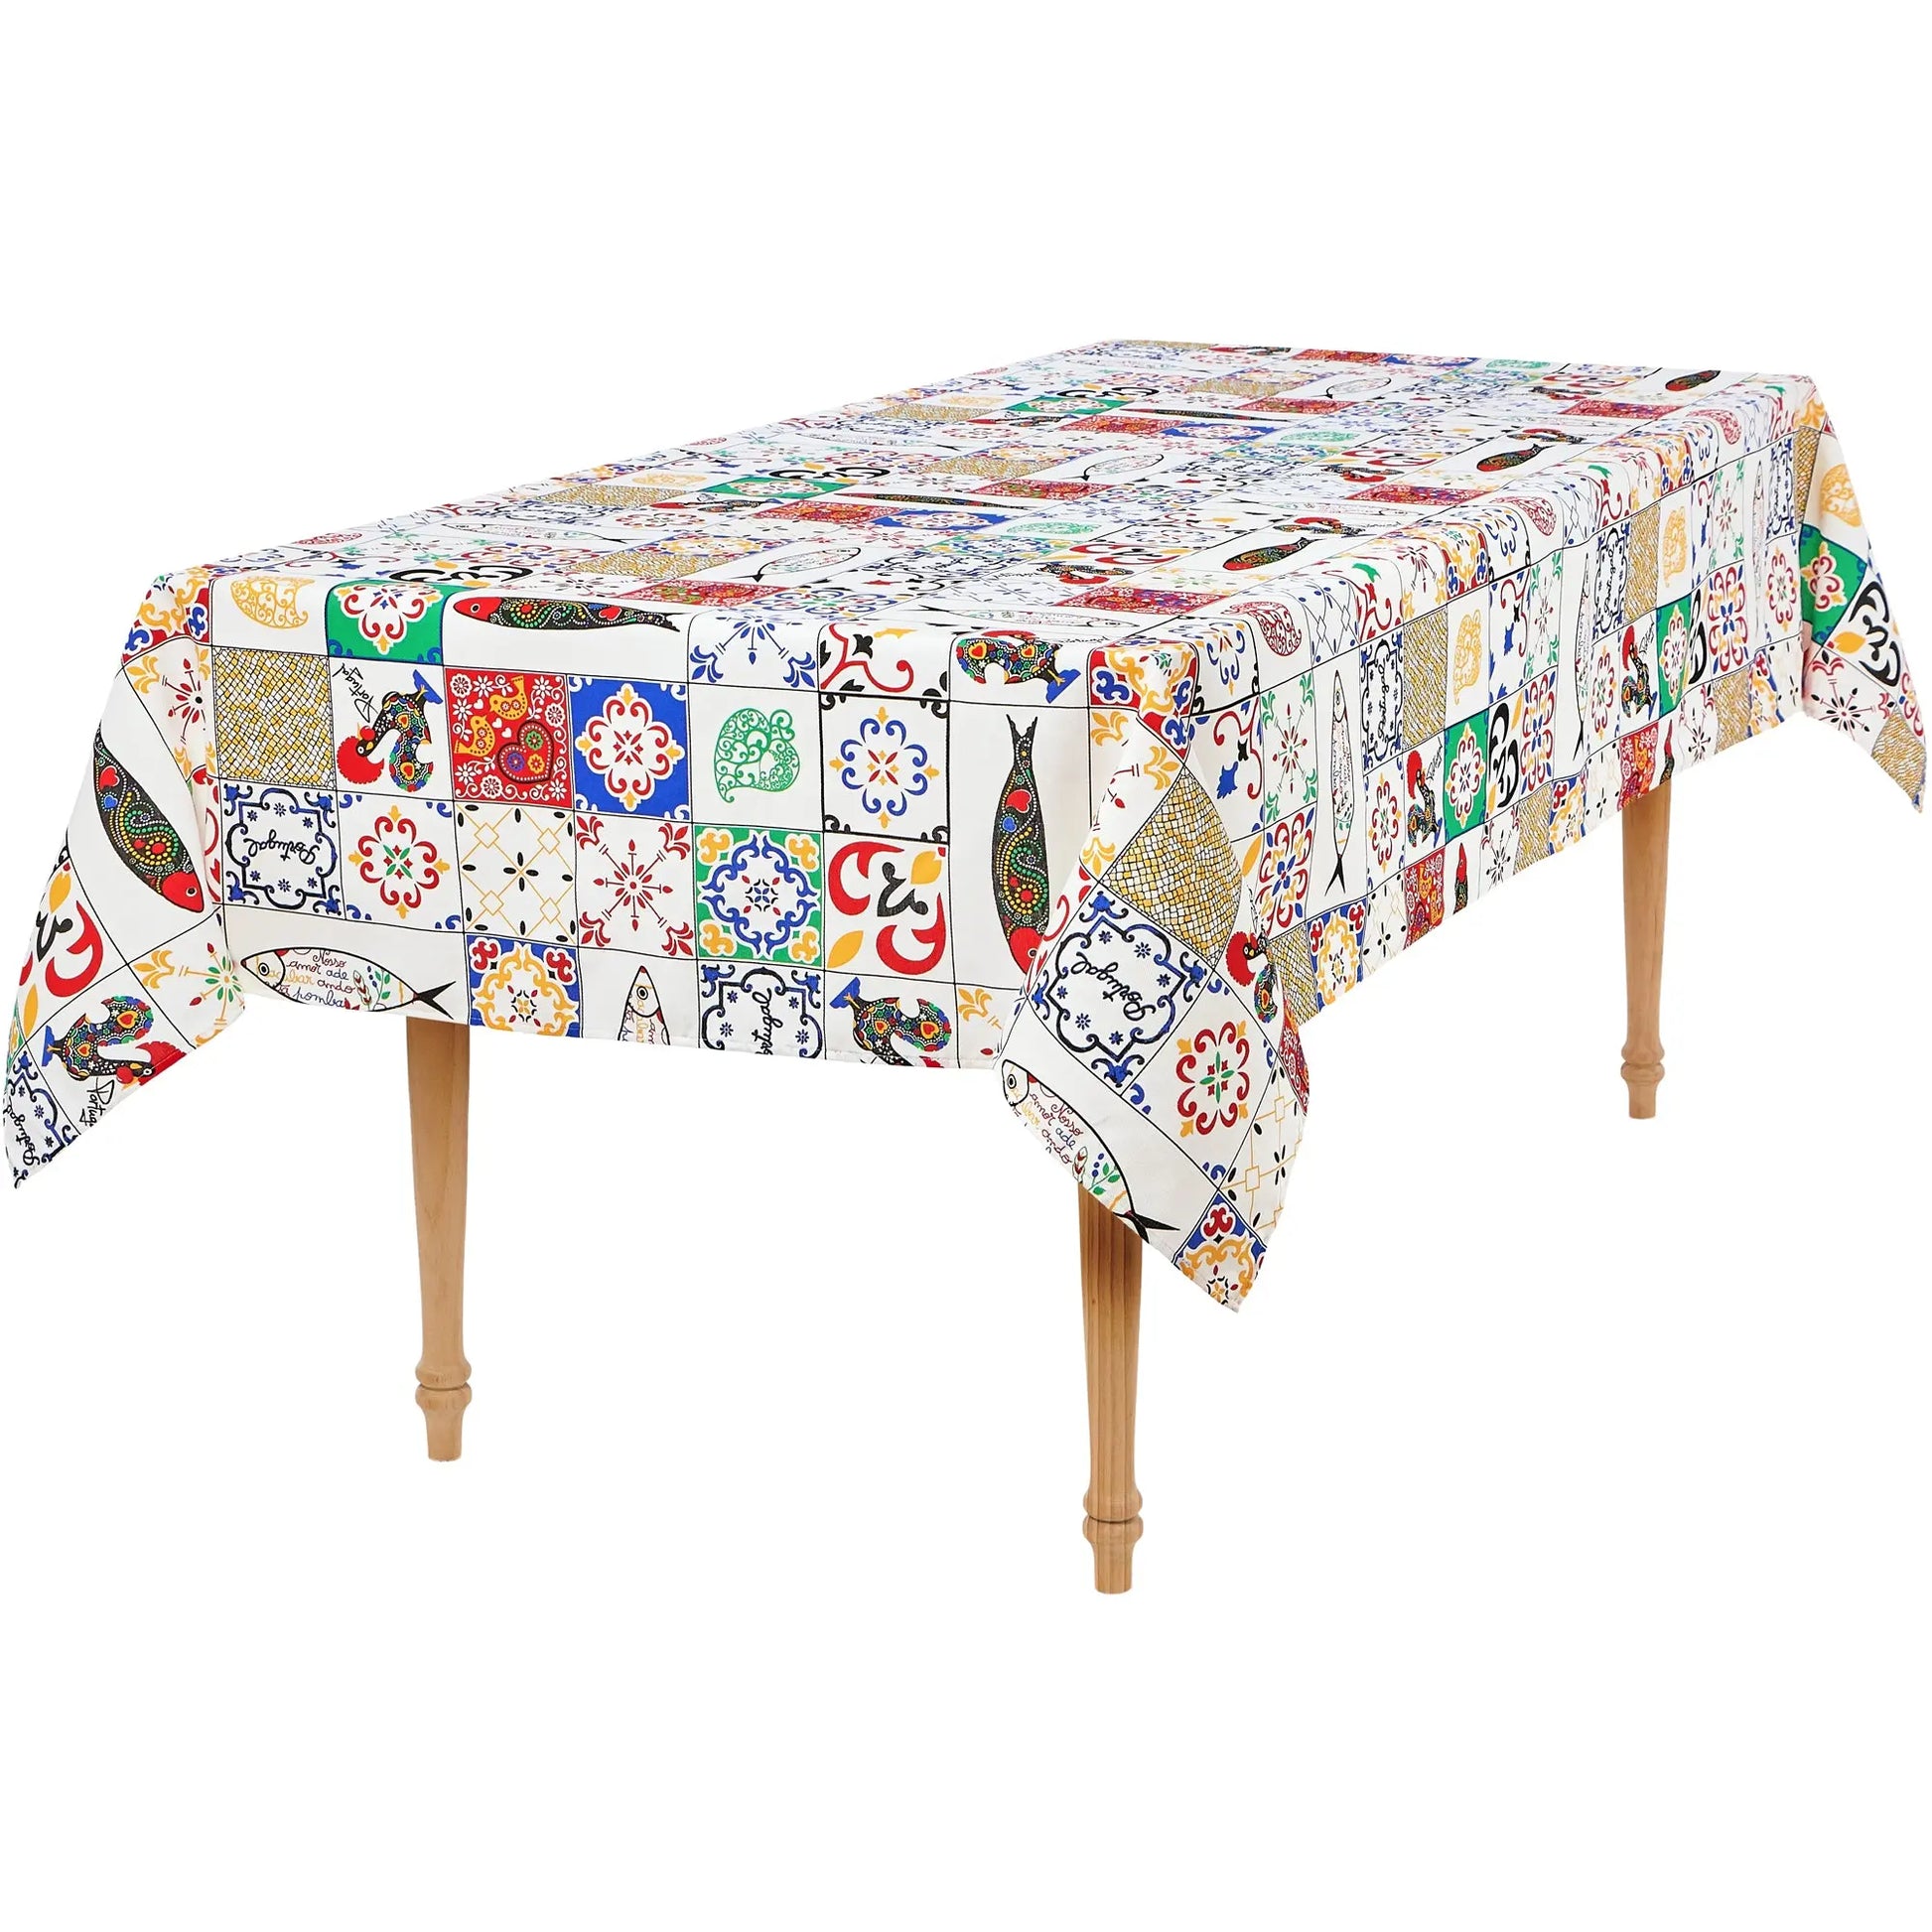 Portuguese Inspired Best of Portugal Tablecloth on table-Rooster Camisa 